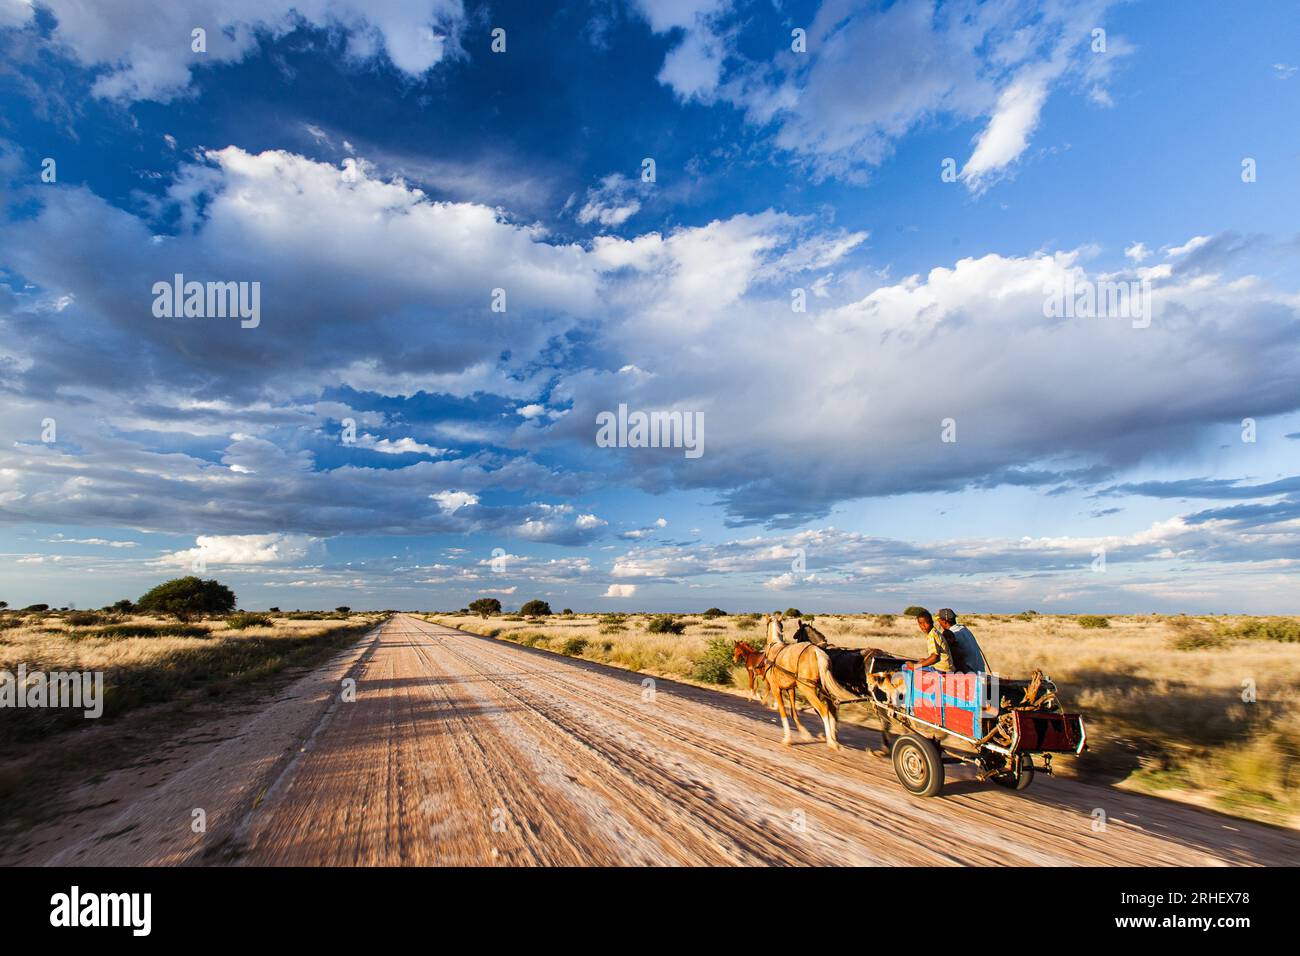 Horse-drawn carriage transport on rural gravel road with blue sky and puffy clouds in Namibia rural poor developing country Africa Stock Photo